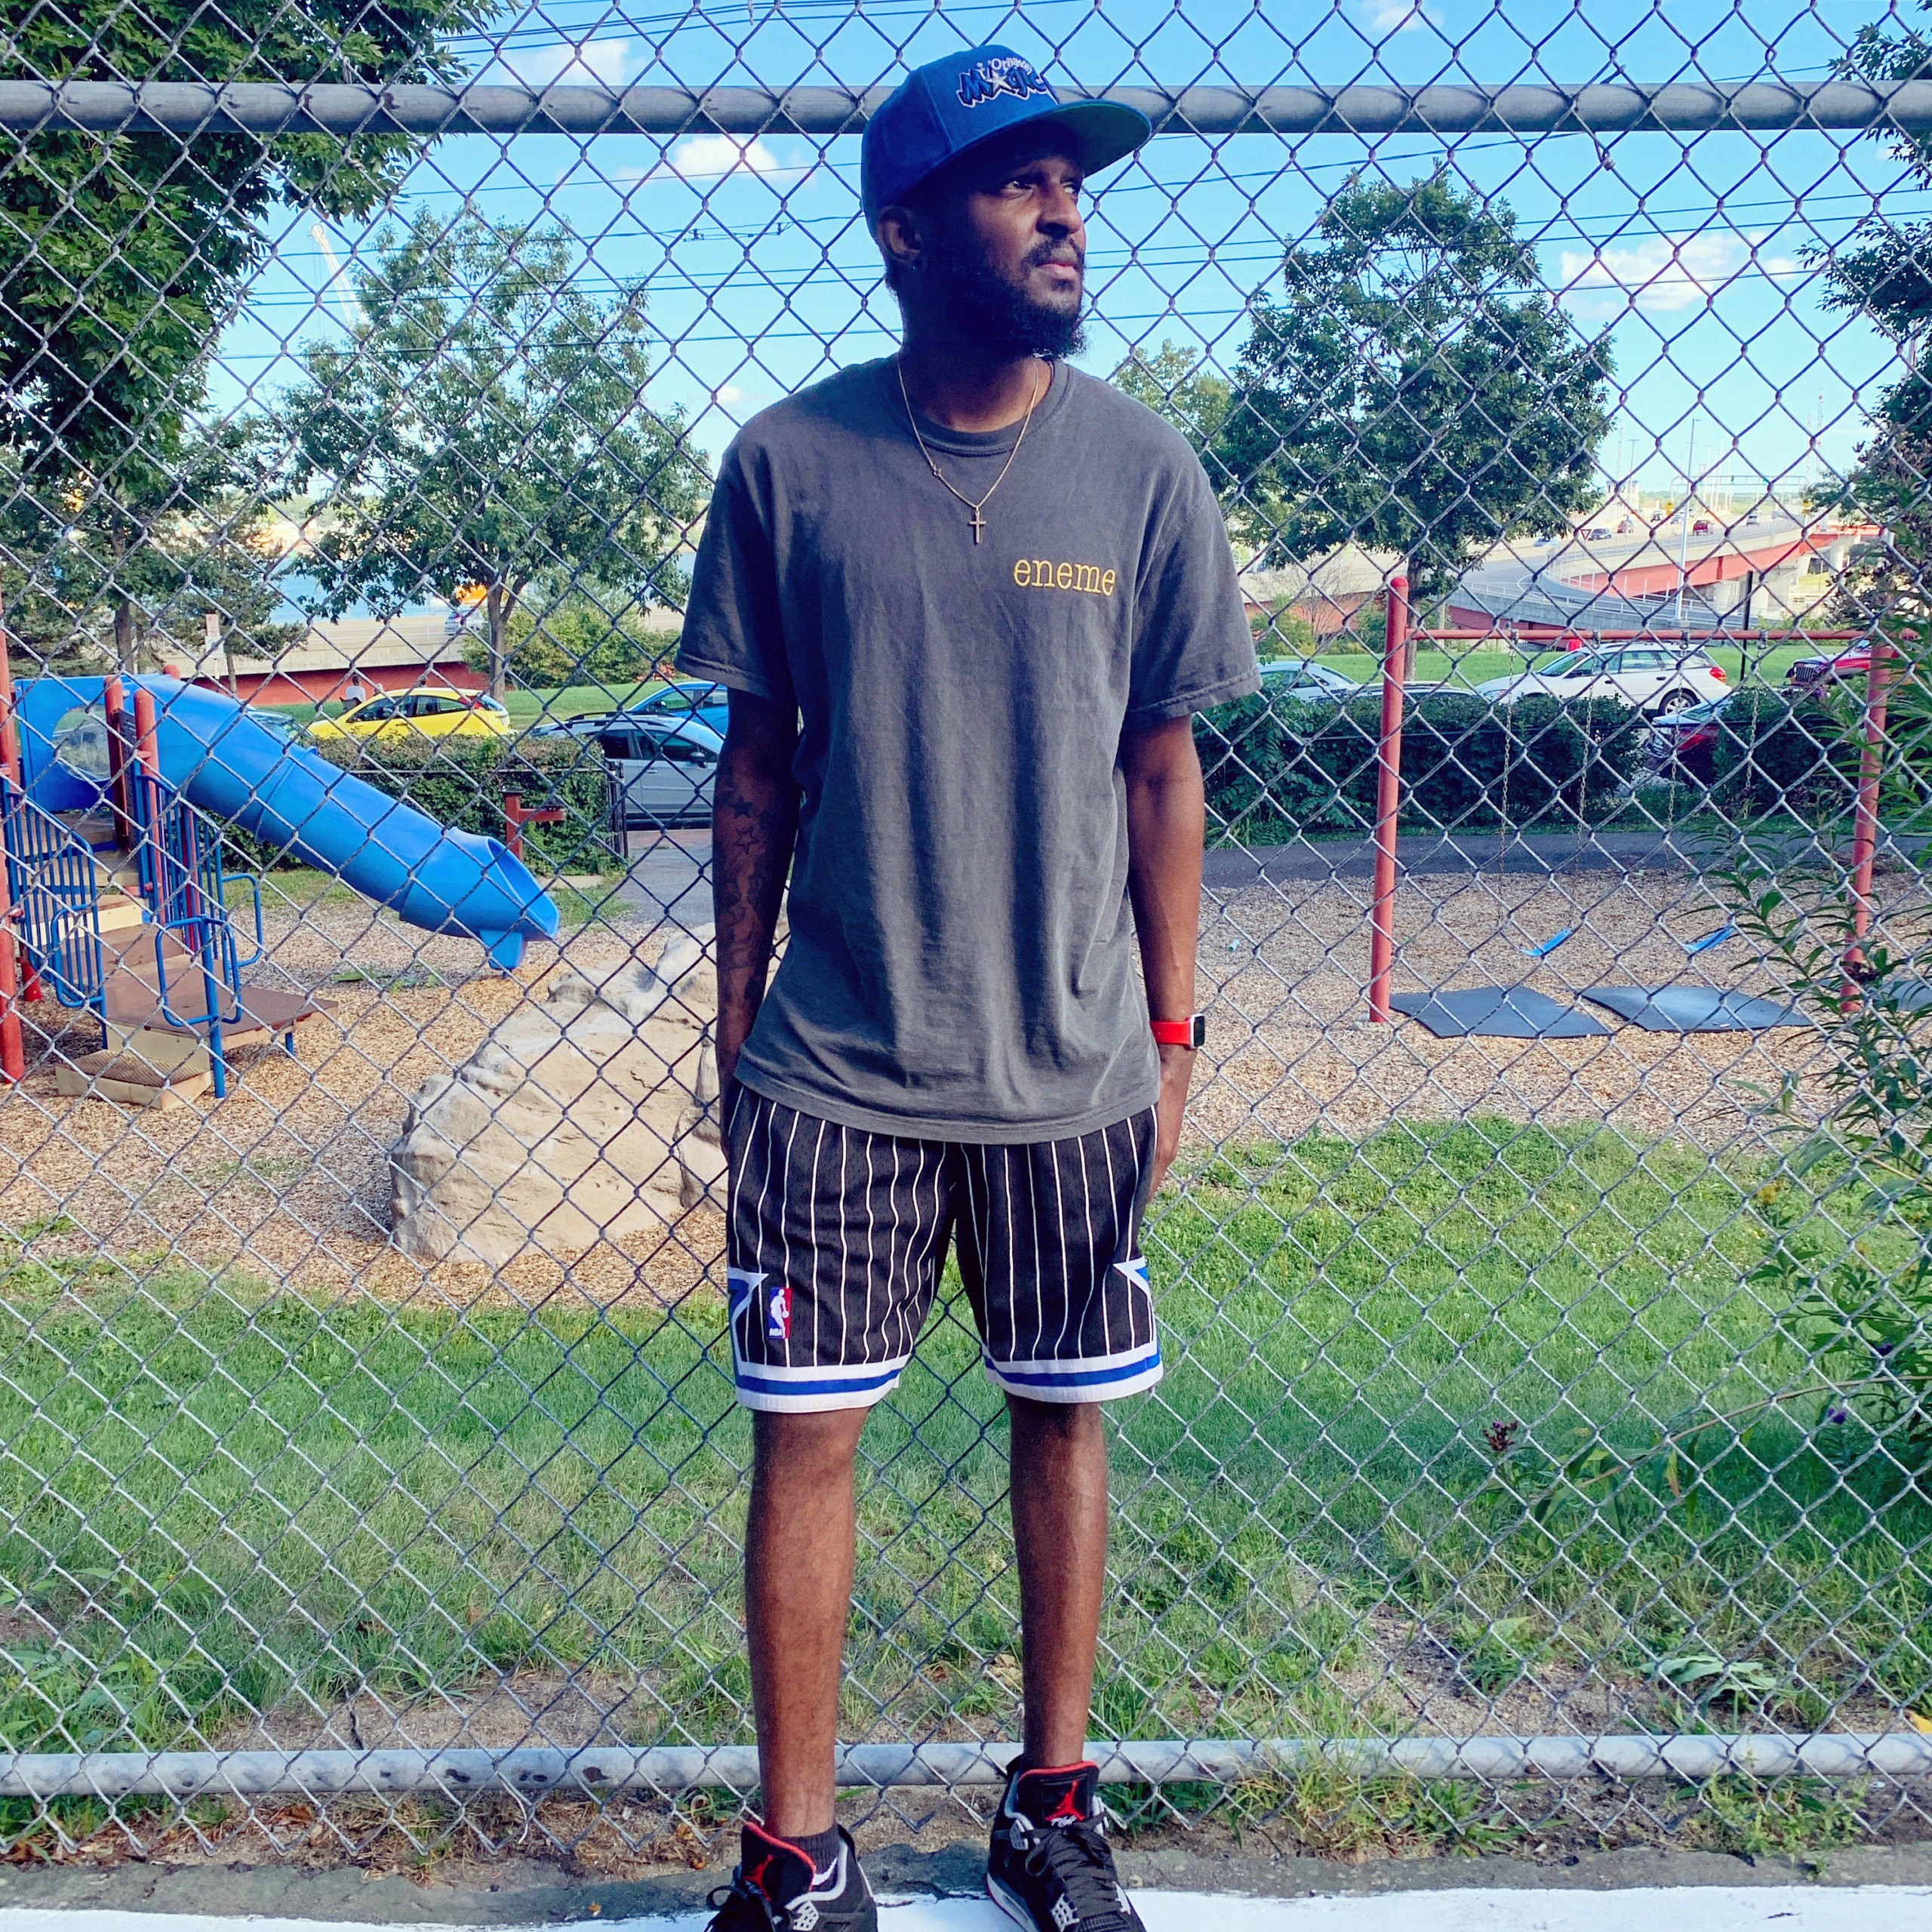 Drell wearing cloth gotten from eneme clothing co